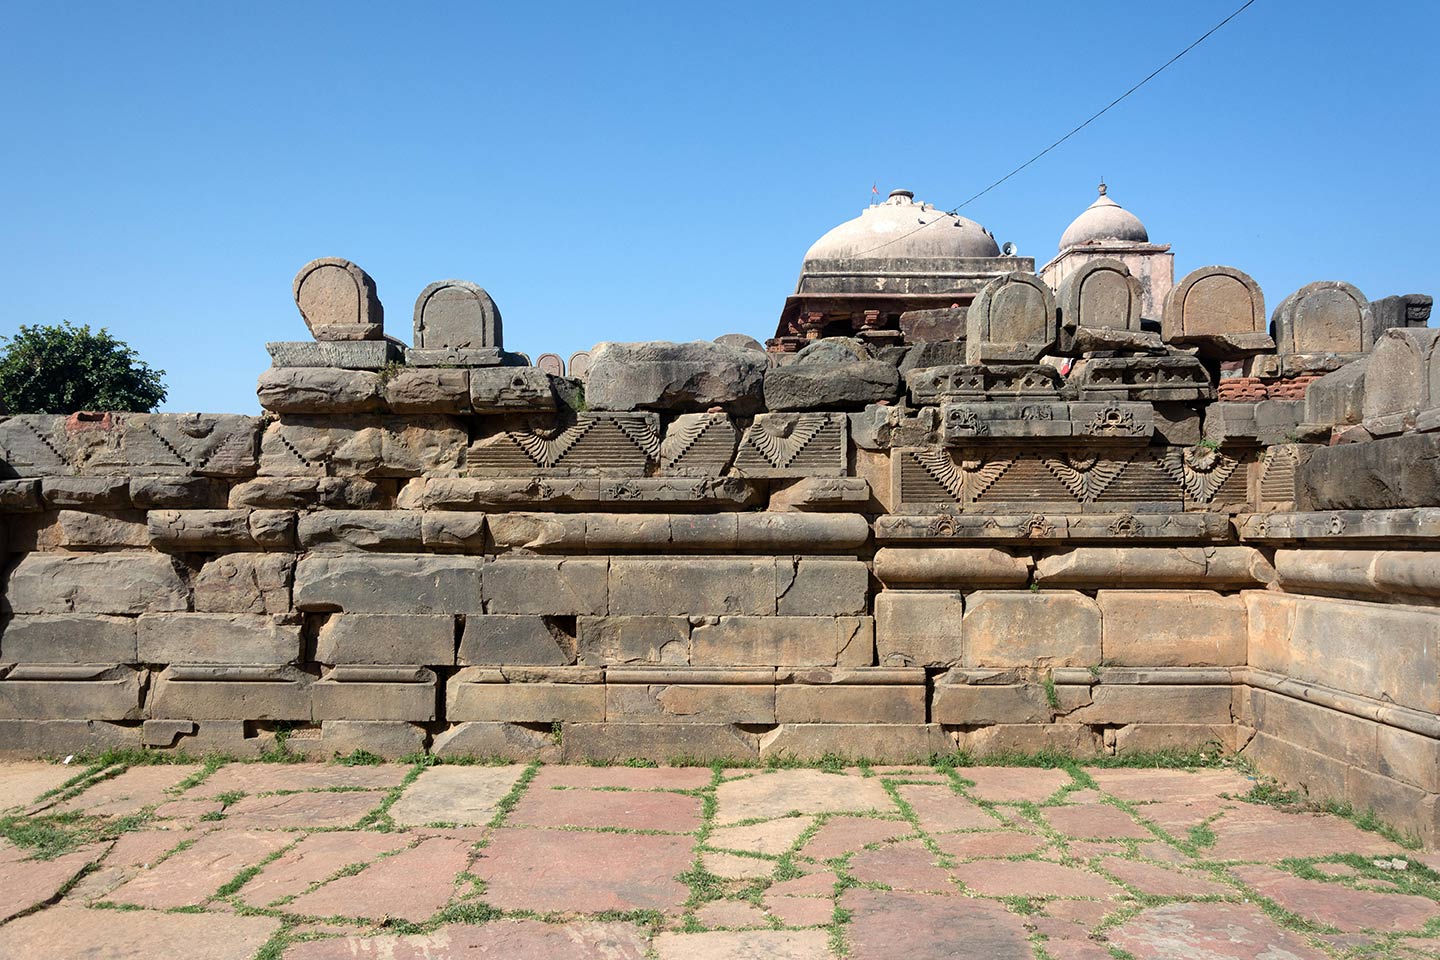 Broken debris from the original temple assembled on the southeast face of the adhisthana.